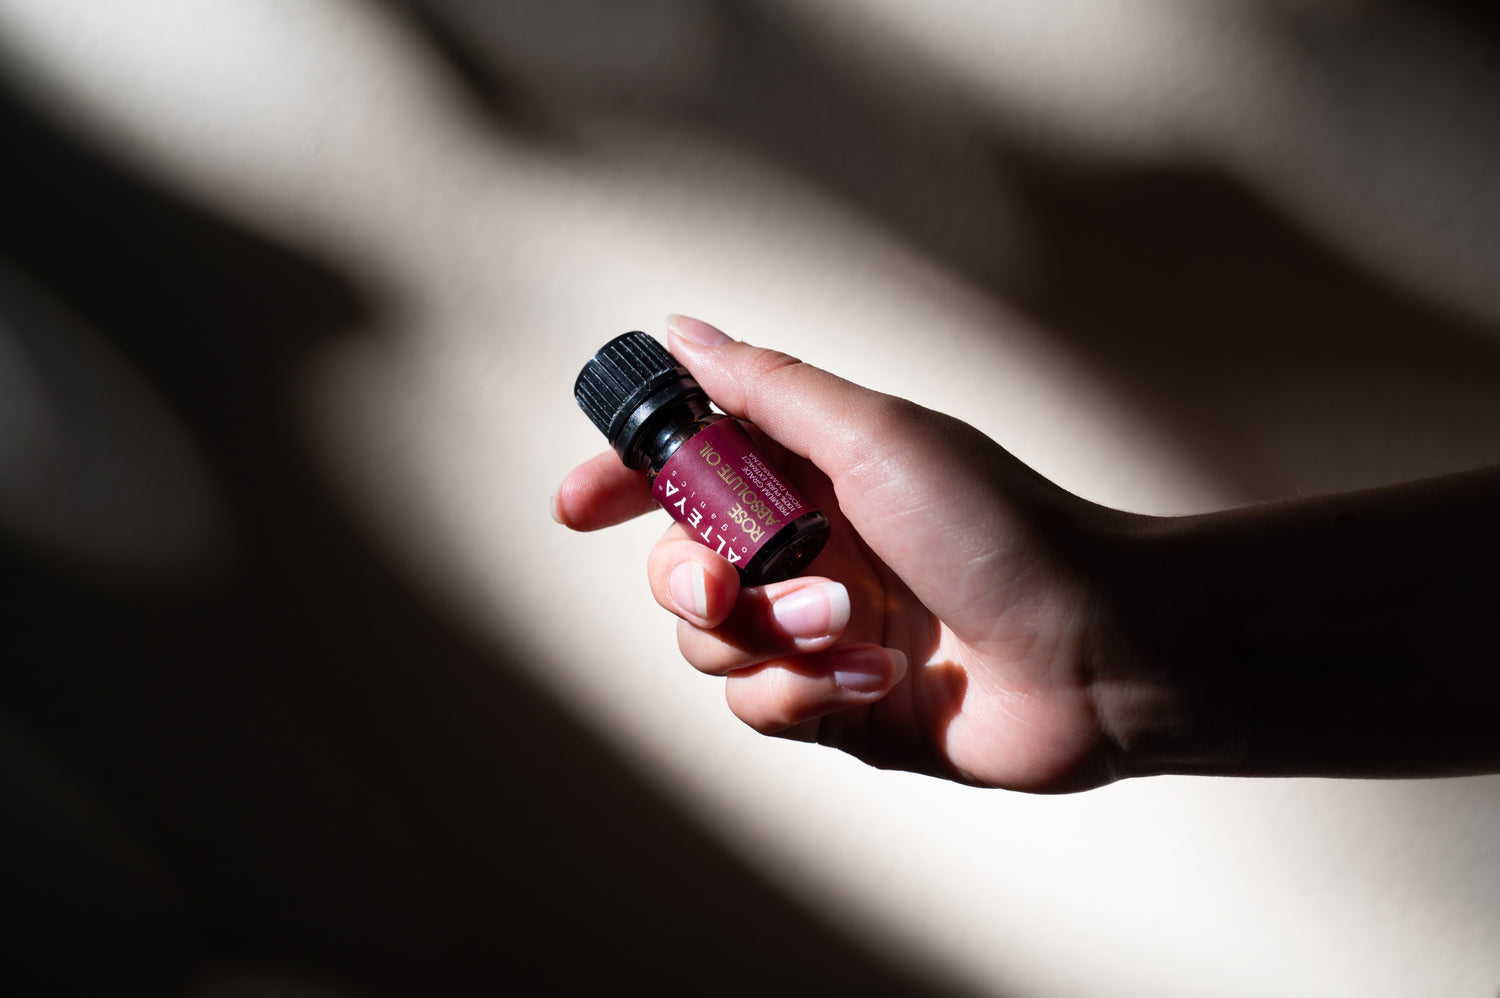 A person's hand holding a bottle of Bulgarian rose essential oil.